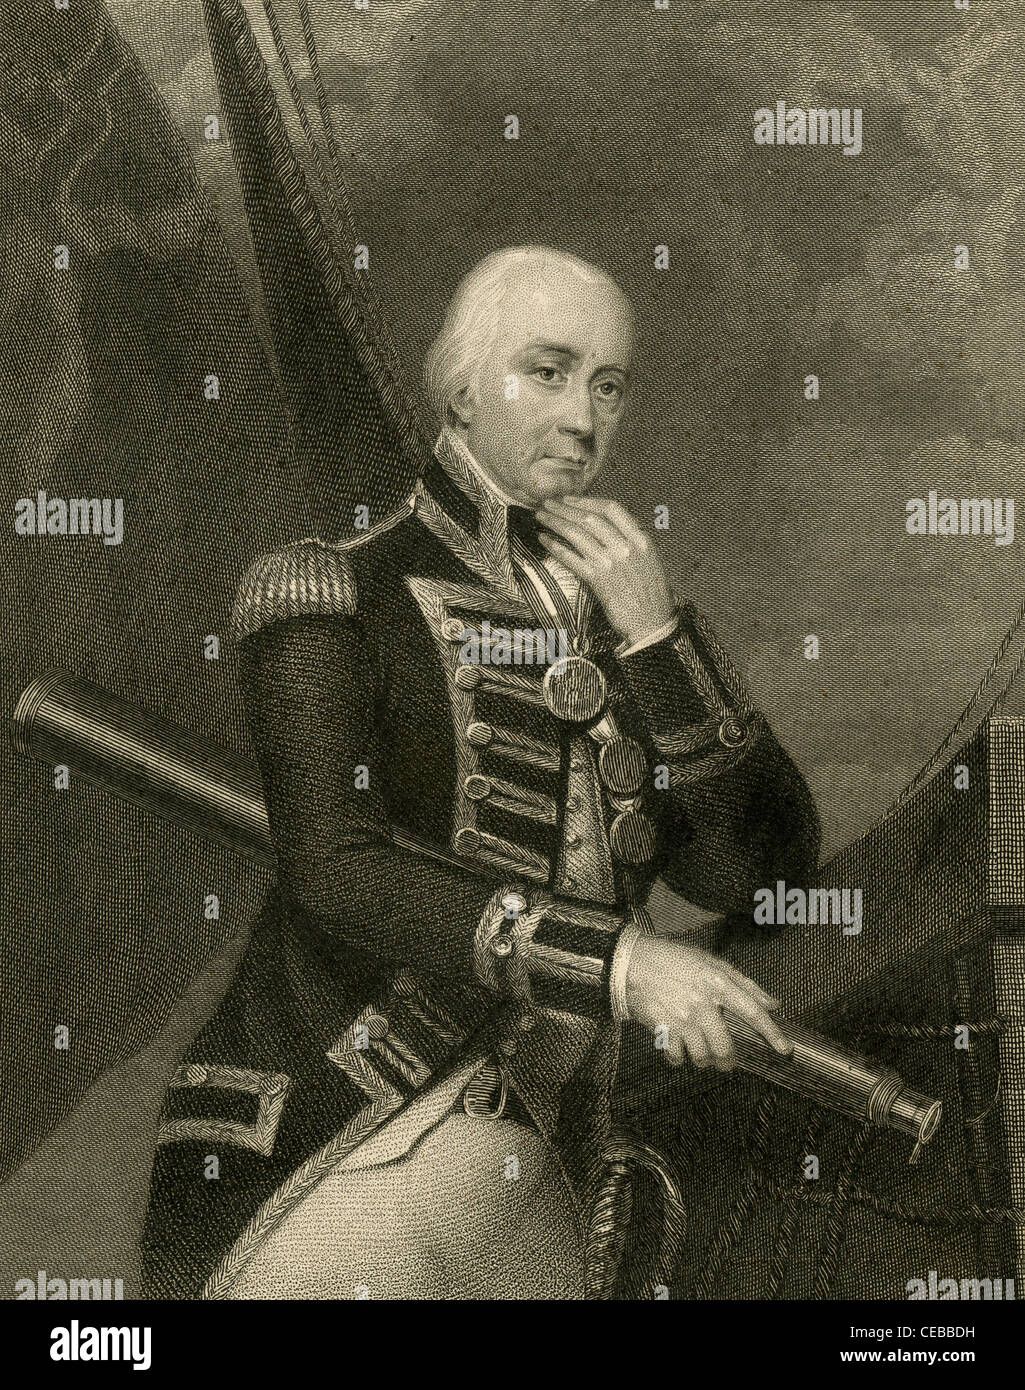 1830 engraving of Vice Admiral Cuthbert Collingwood, 1st Baron Collingwood. Stock Photo